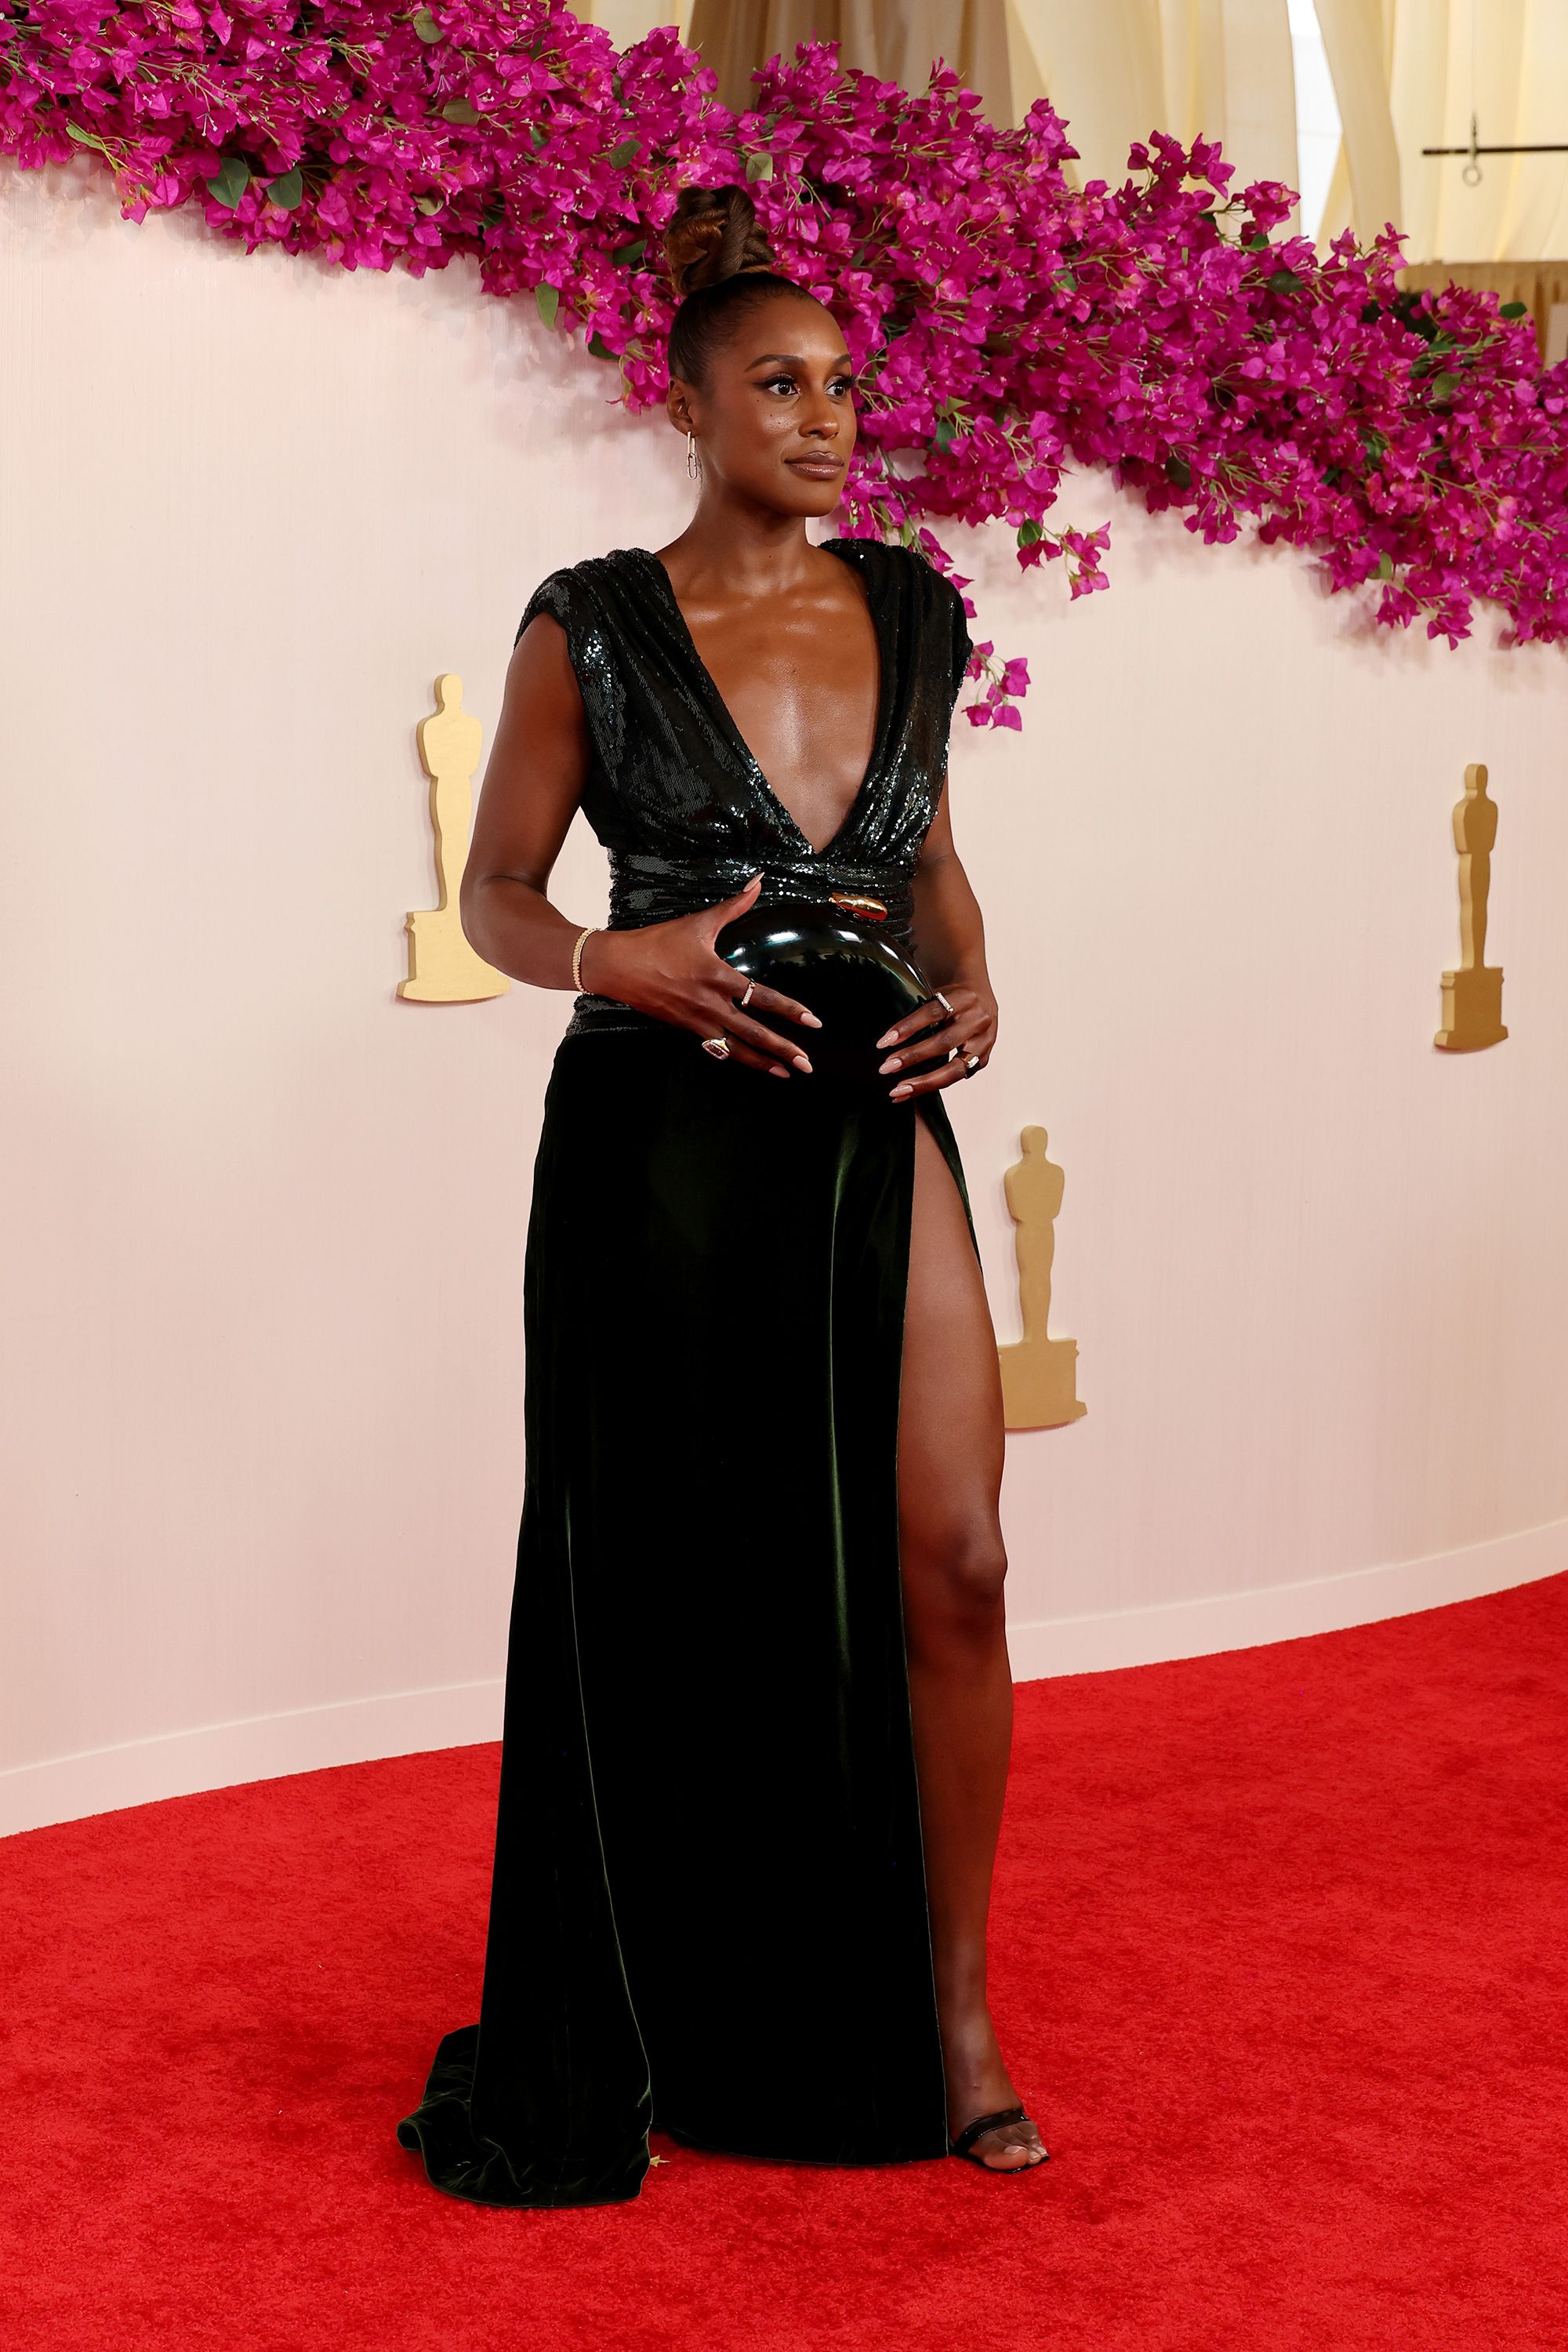 Issa Rae, who appeared in two nominated films (